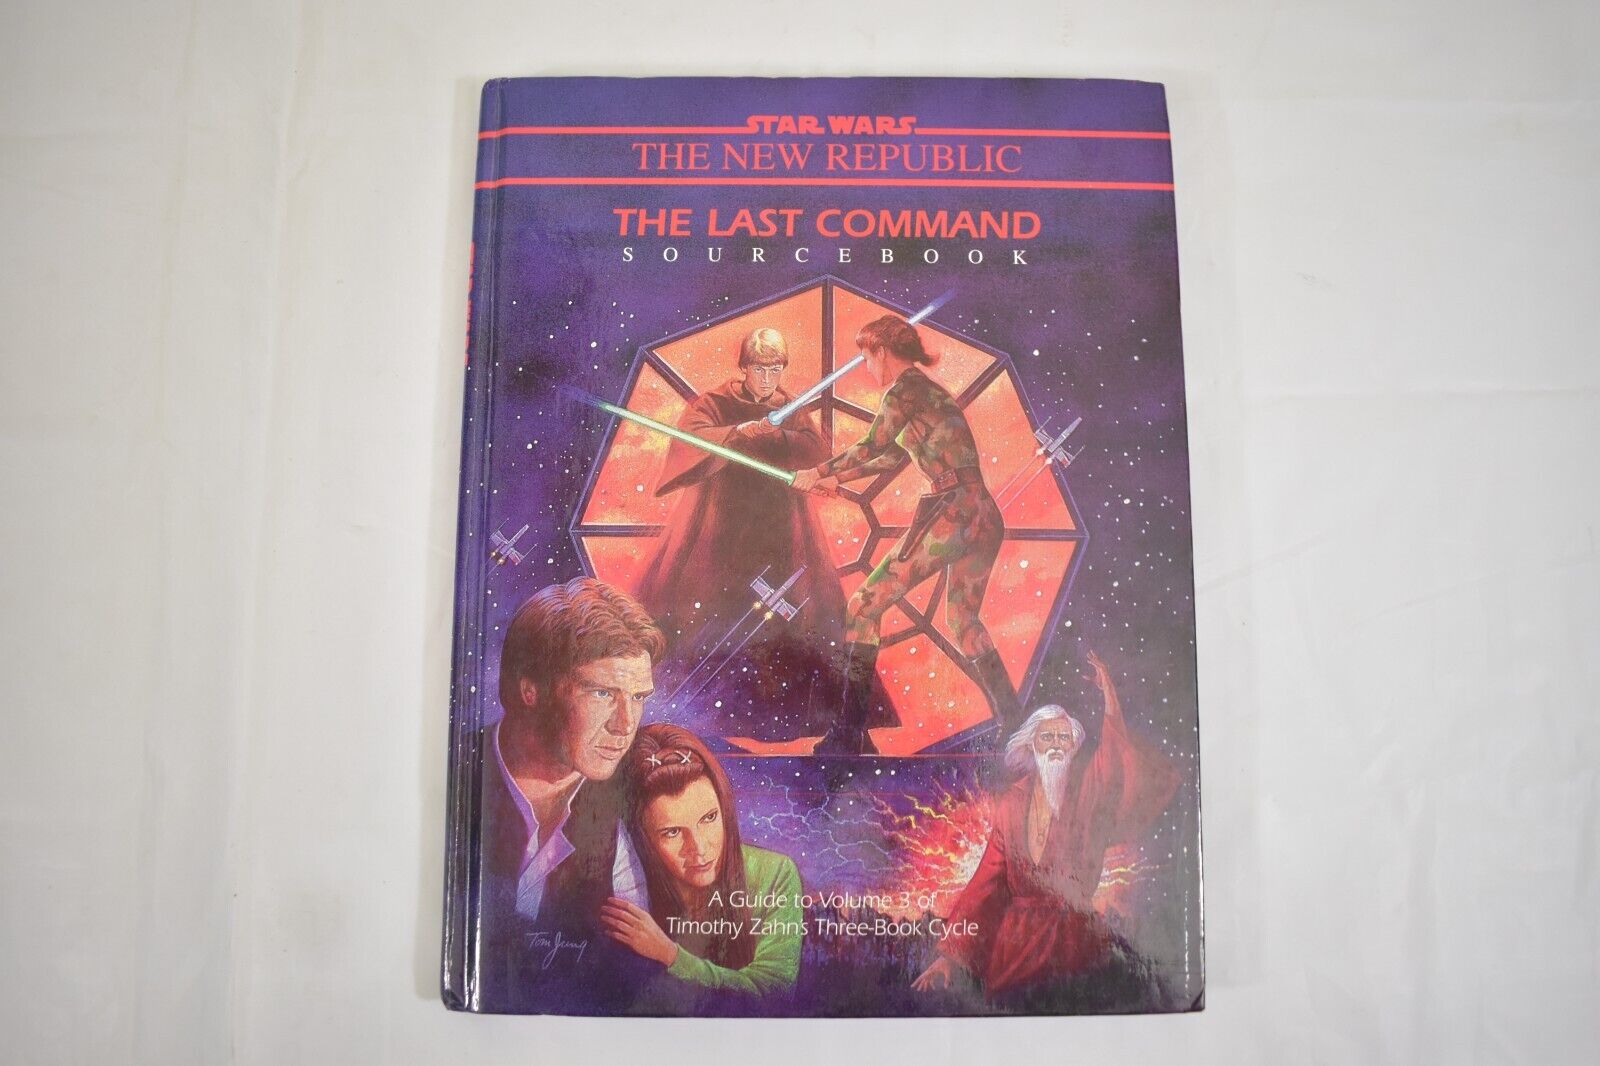 Star Wars The New Republic The Last Command Sourcebook RPG West End Games 1994